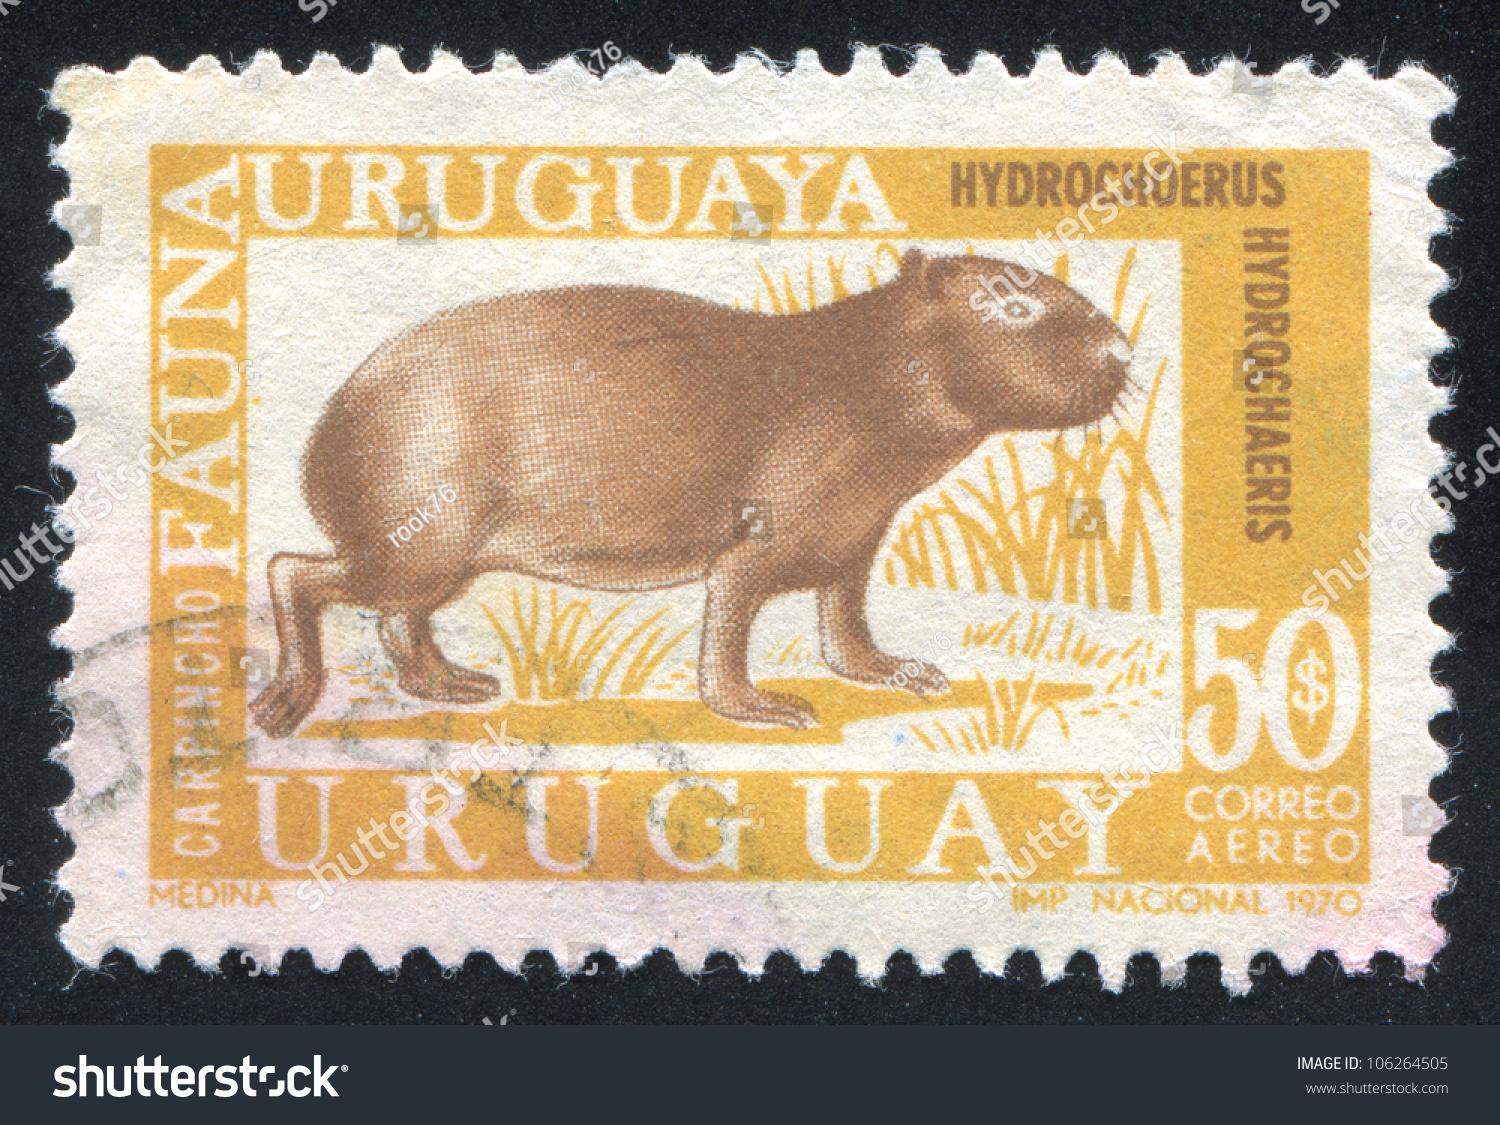 Uruguay Circa 1970 Stamp Printed By Stock Photo Edit Now 106264505